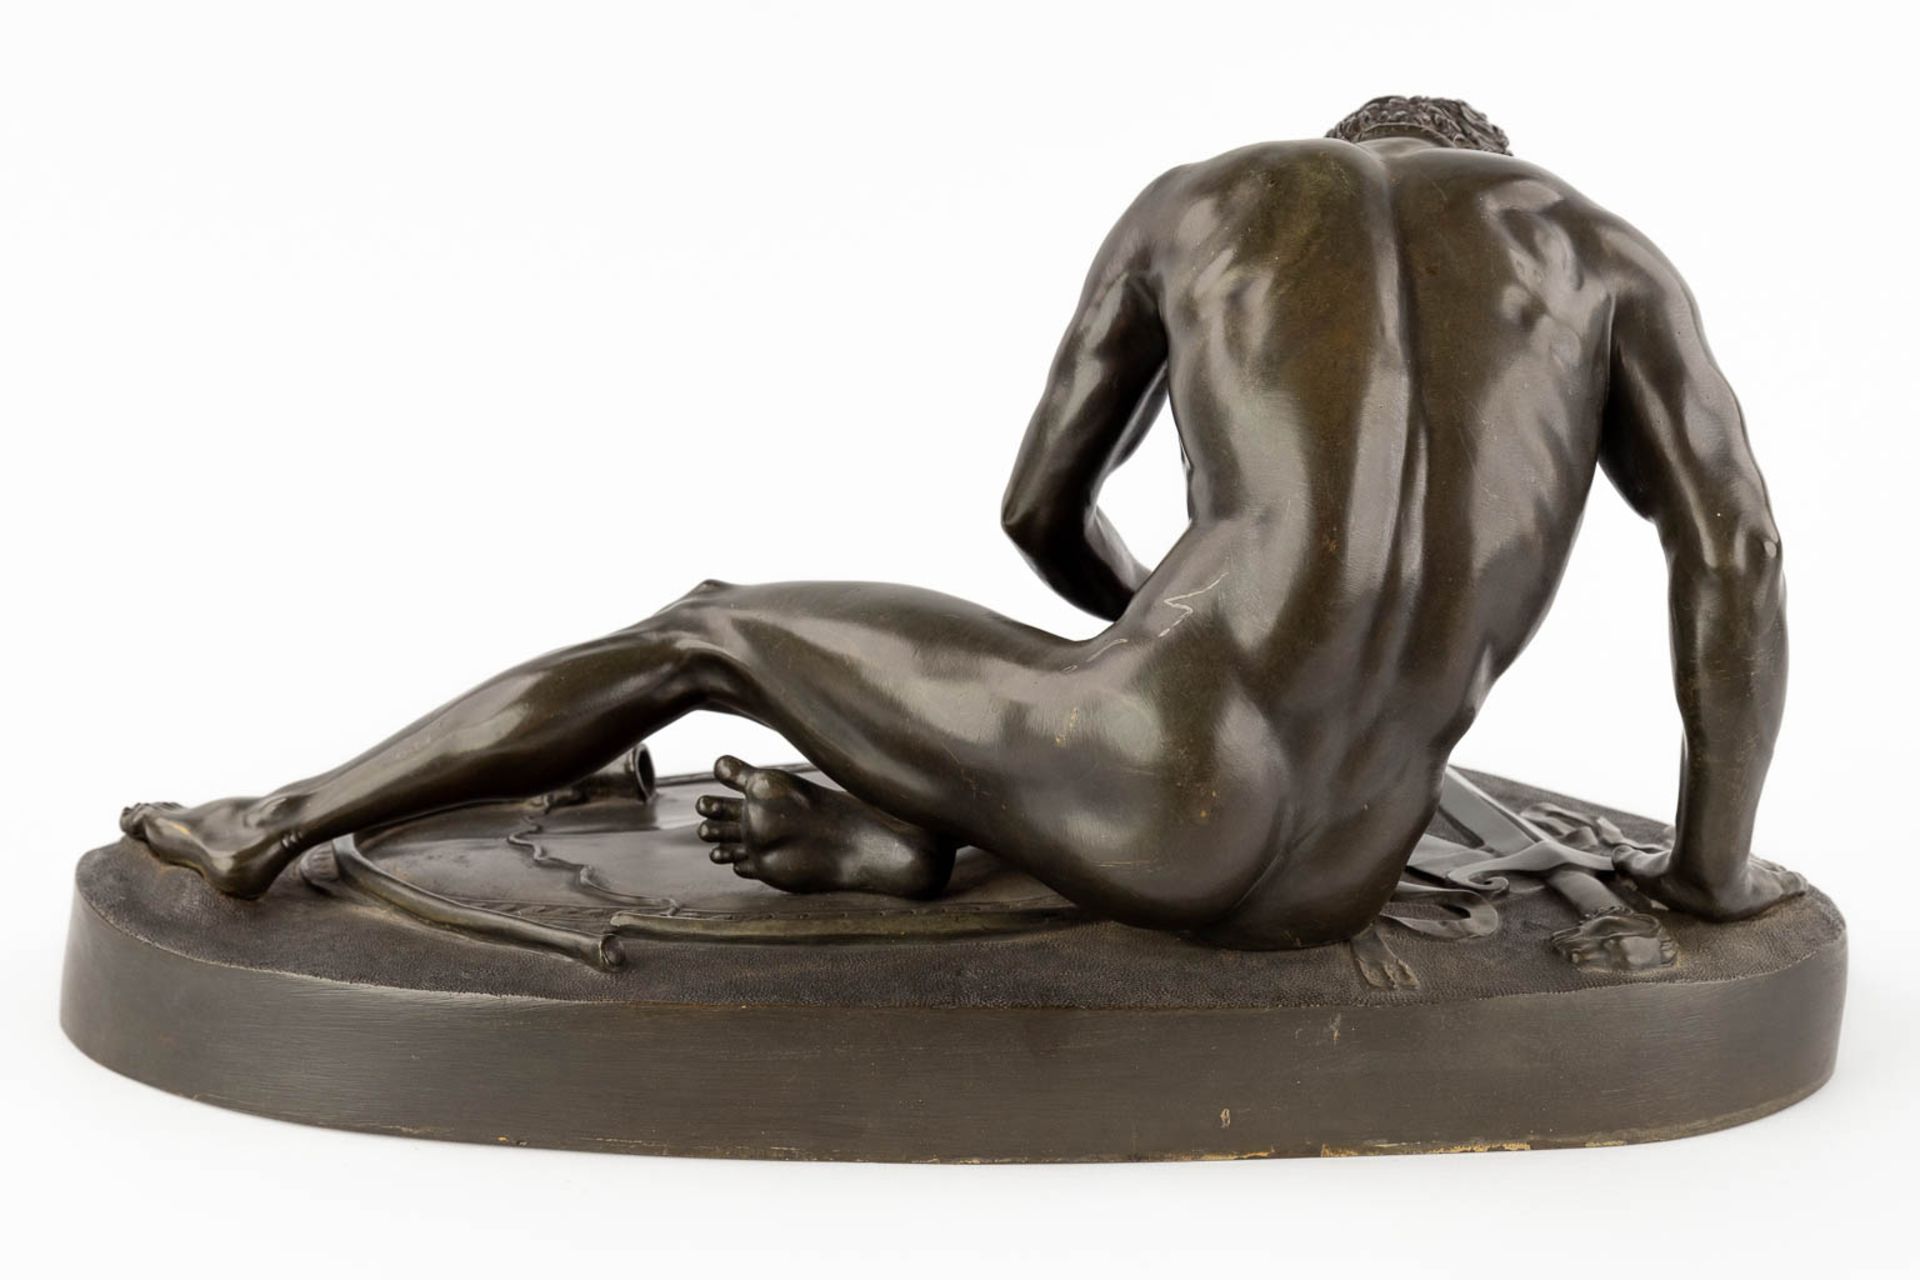 After an antique statue 'The Dying Gaul' patinated bronze. 19th/20th C. (D:21 x W:46 x H:24 cm) - Image 6 of 11